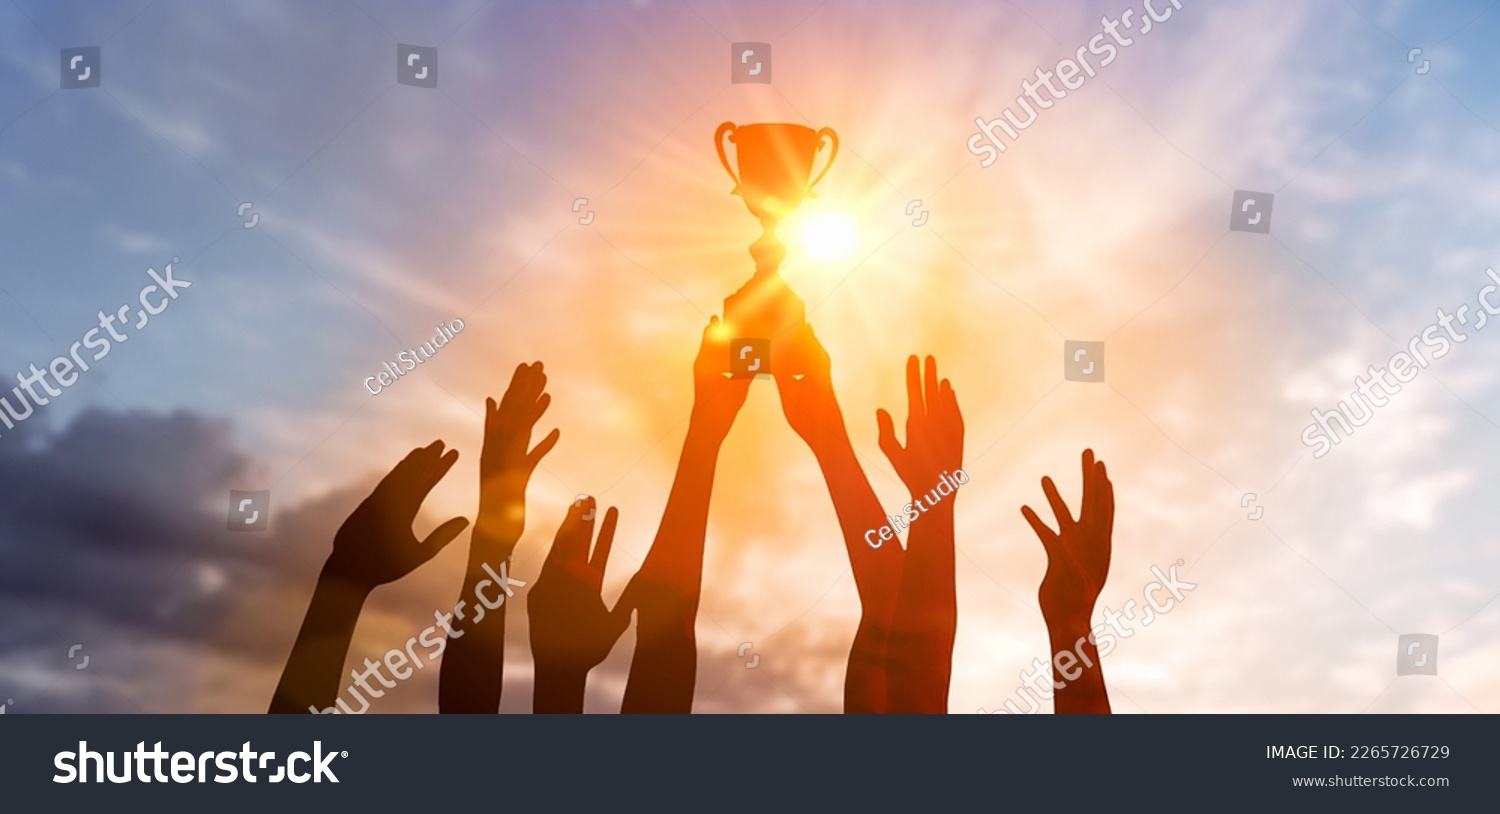 Success of teamwork, joint achievement of goal in business and life. Winning team is holding trophy in hands. Silhouettes of many hands in sunset. #2265726729